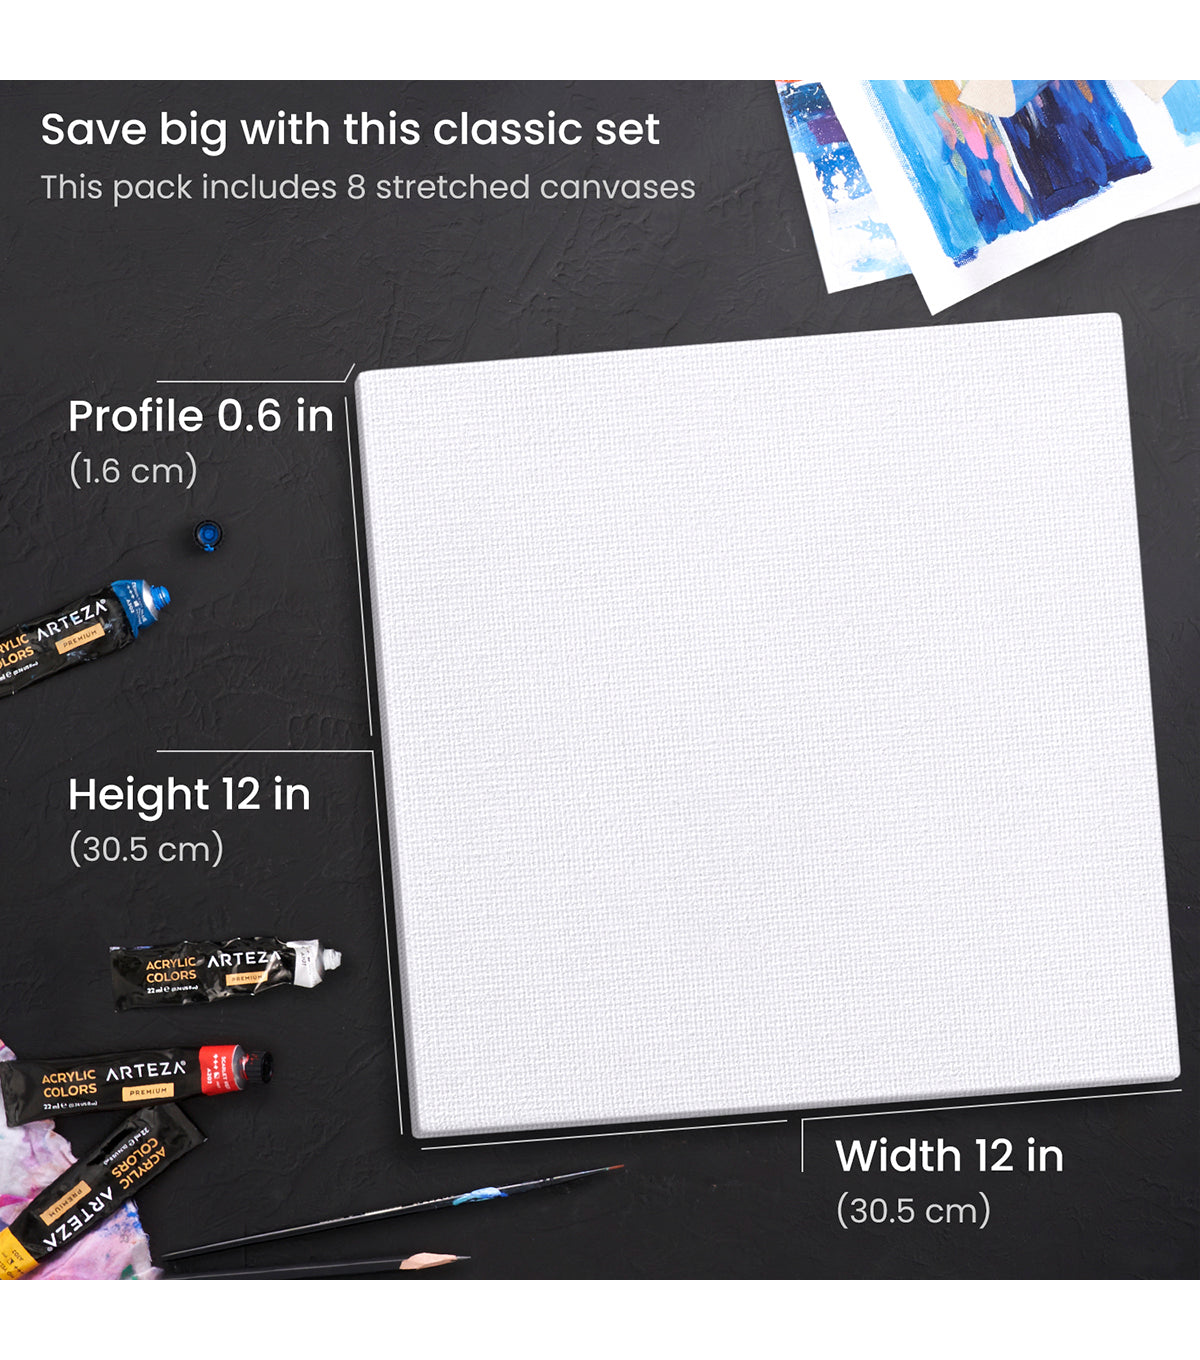 Arteza Stretched Canvas, Premium, White, 12x12, Blank Canvas Boards For  Painting - 8 Pack : Target